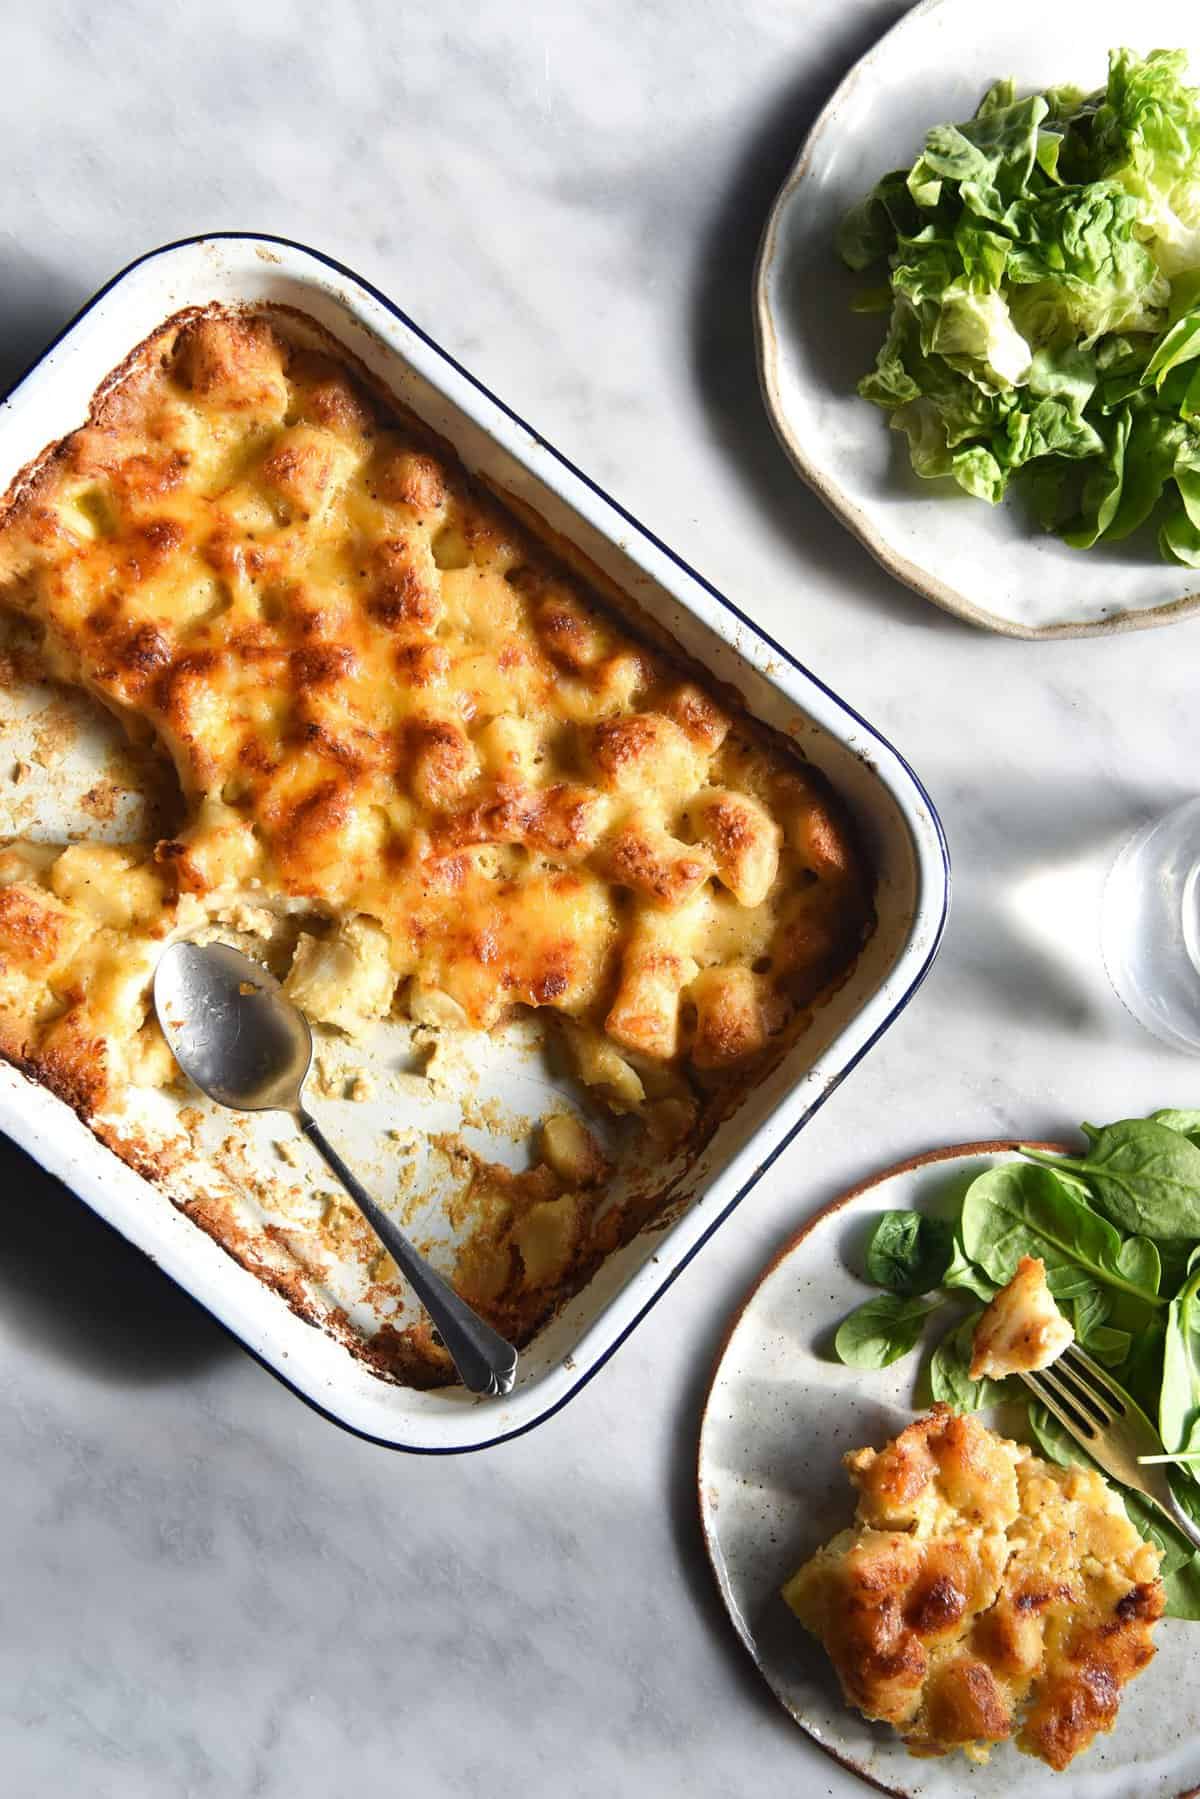 Gluten free gnocchi in a lactose free bechamel bake from www.georgeats.com | @georgeats